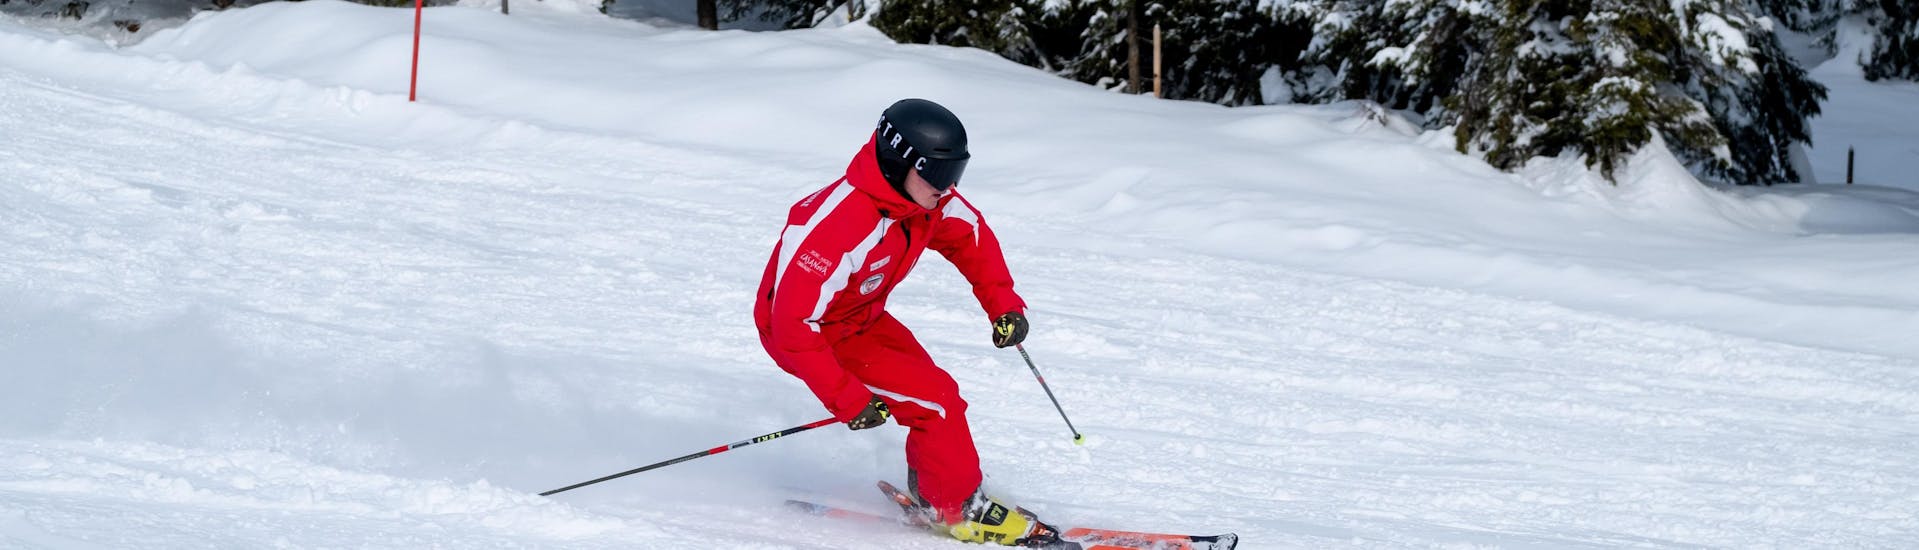 Ski Instructor Private for Adults - All Levels with Swiss Ski School Obersaxen - Hero image